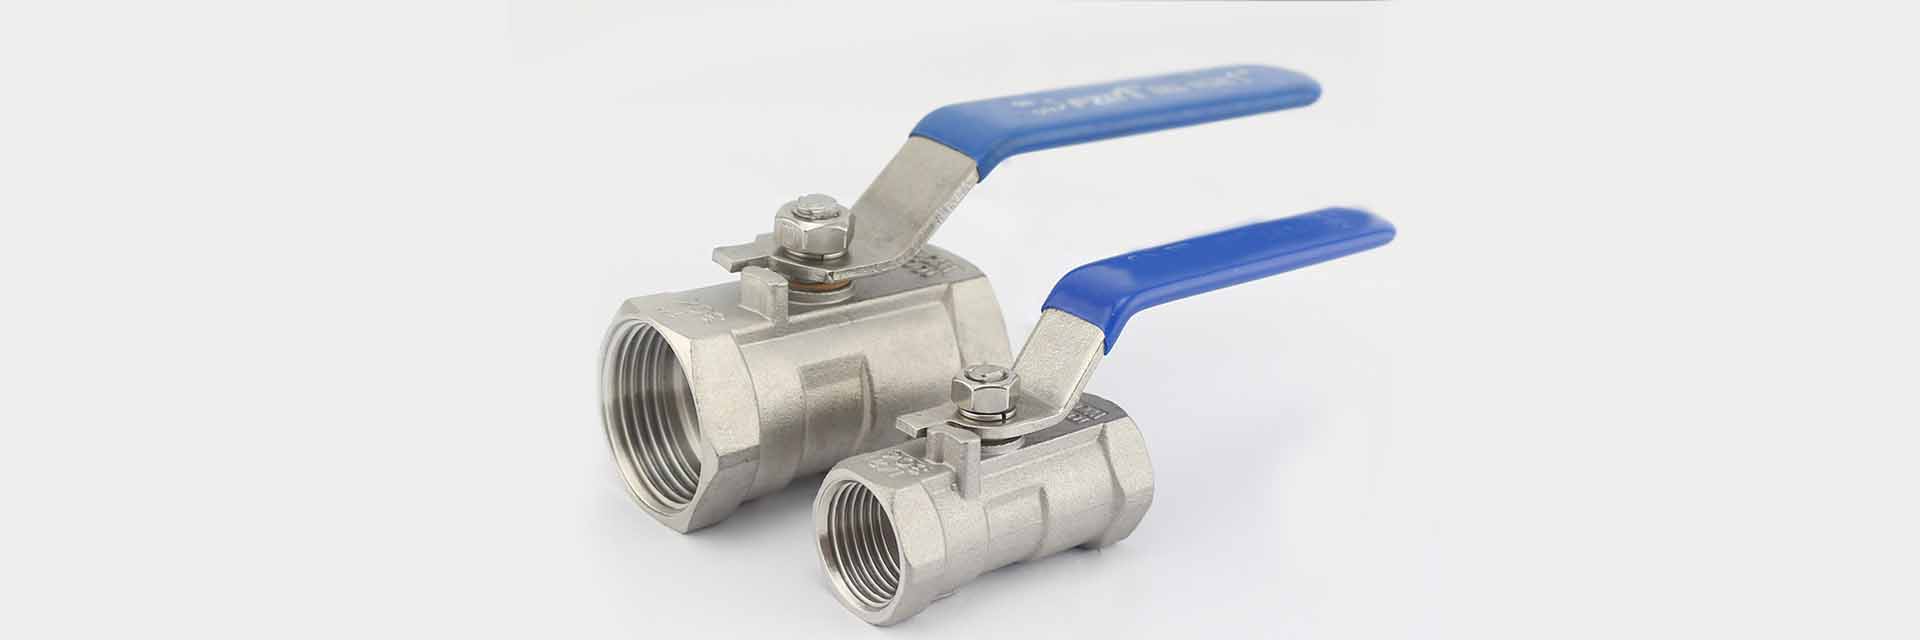 Stainless Steel 2 Way Ball Valves